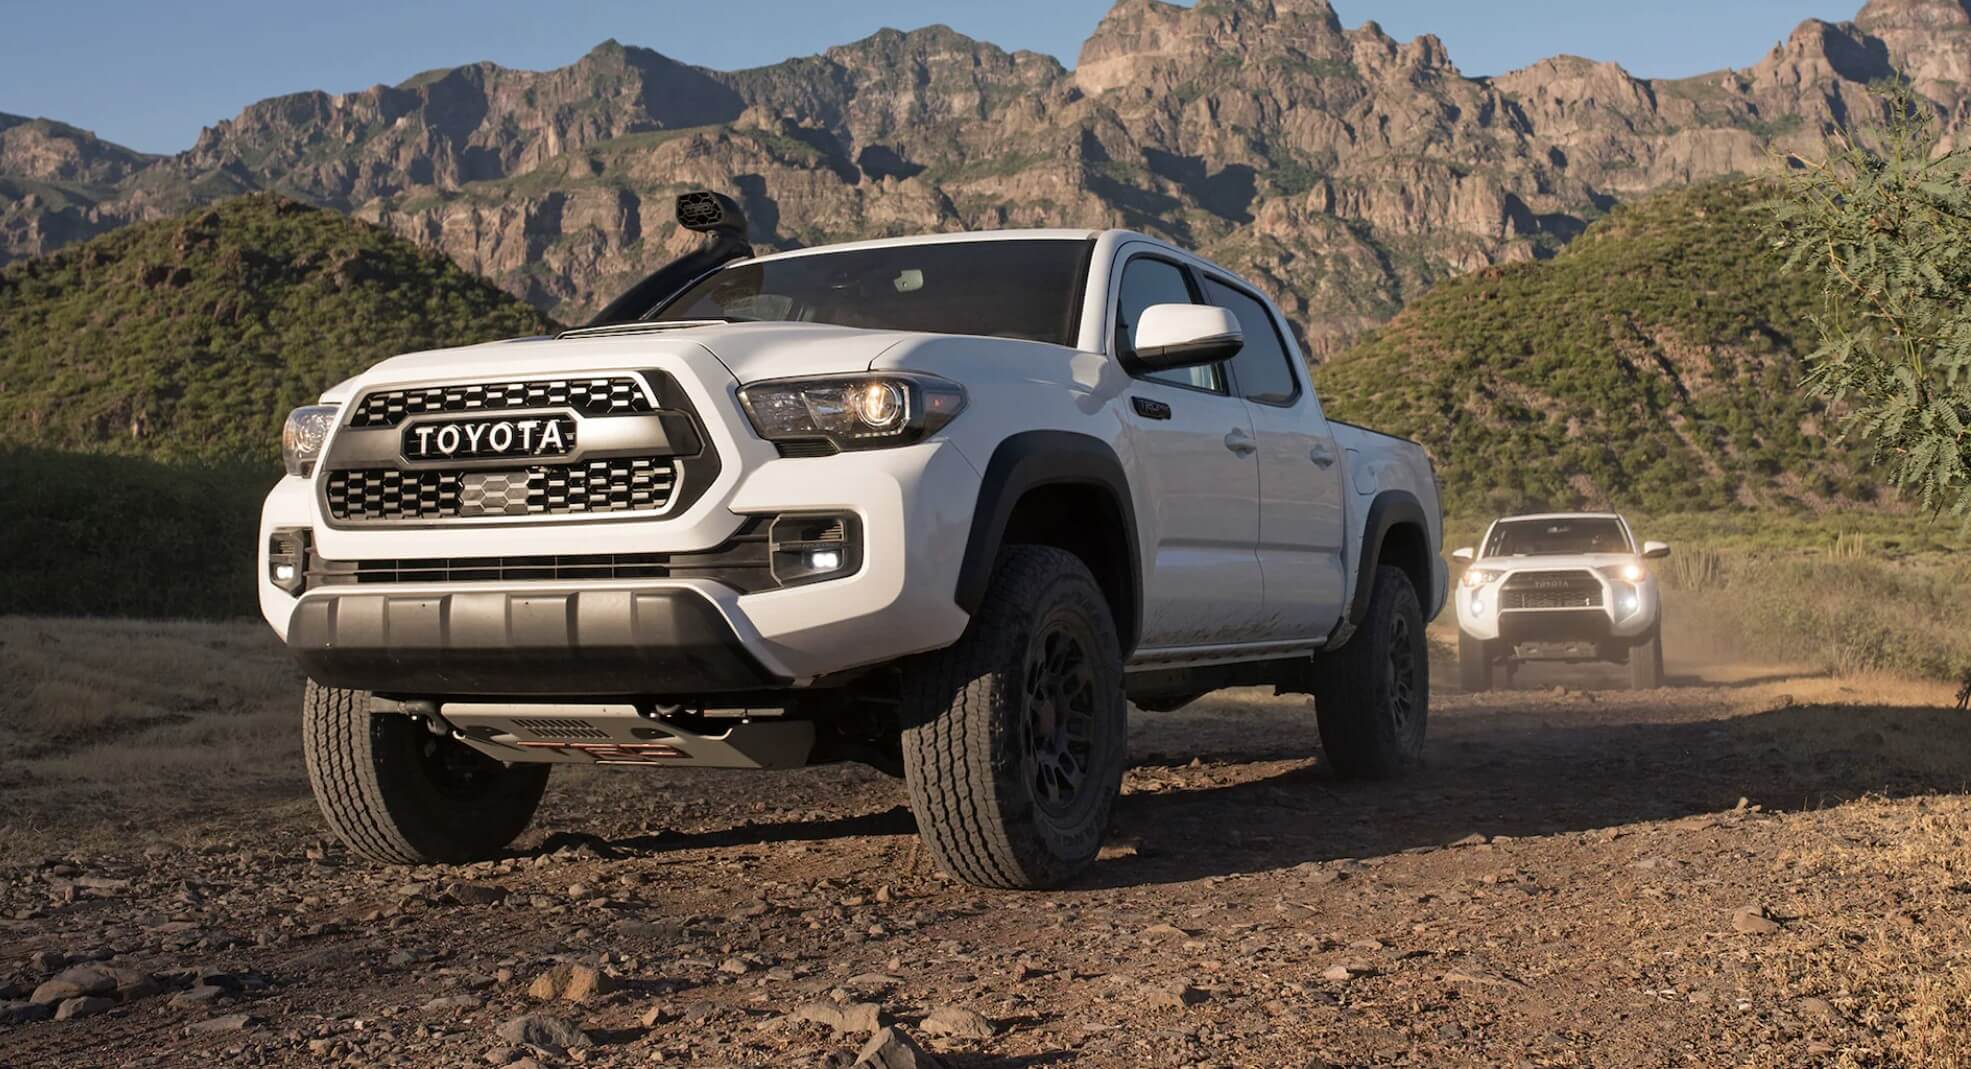 How reliable is the 2019 Toyota Tacoma?